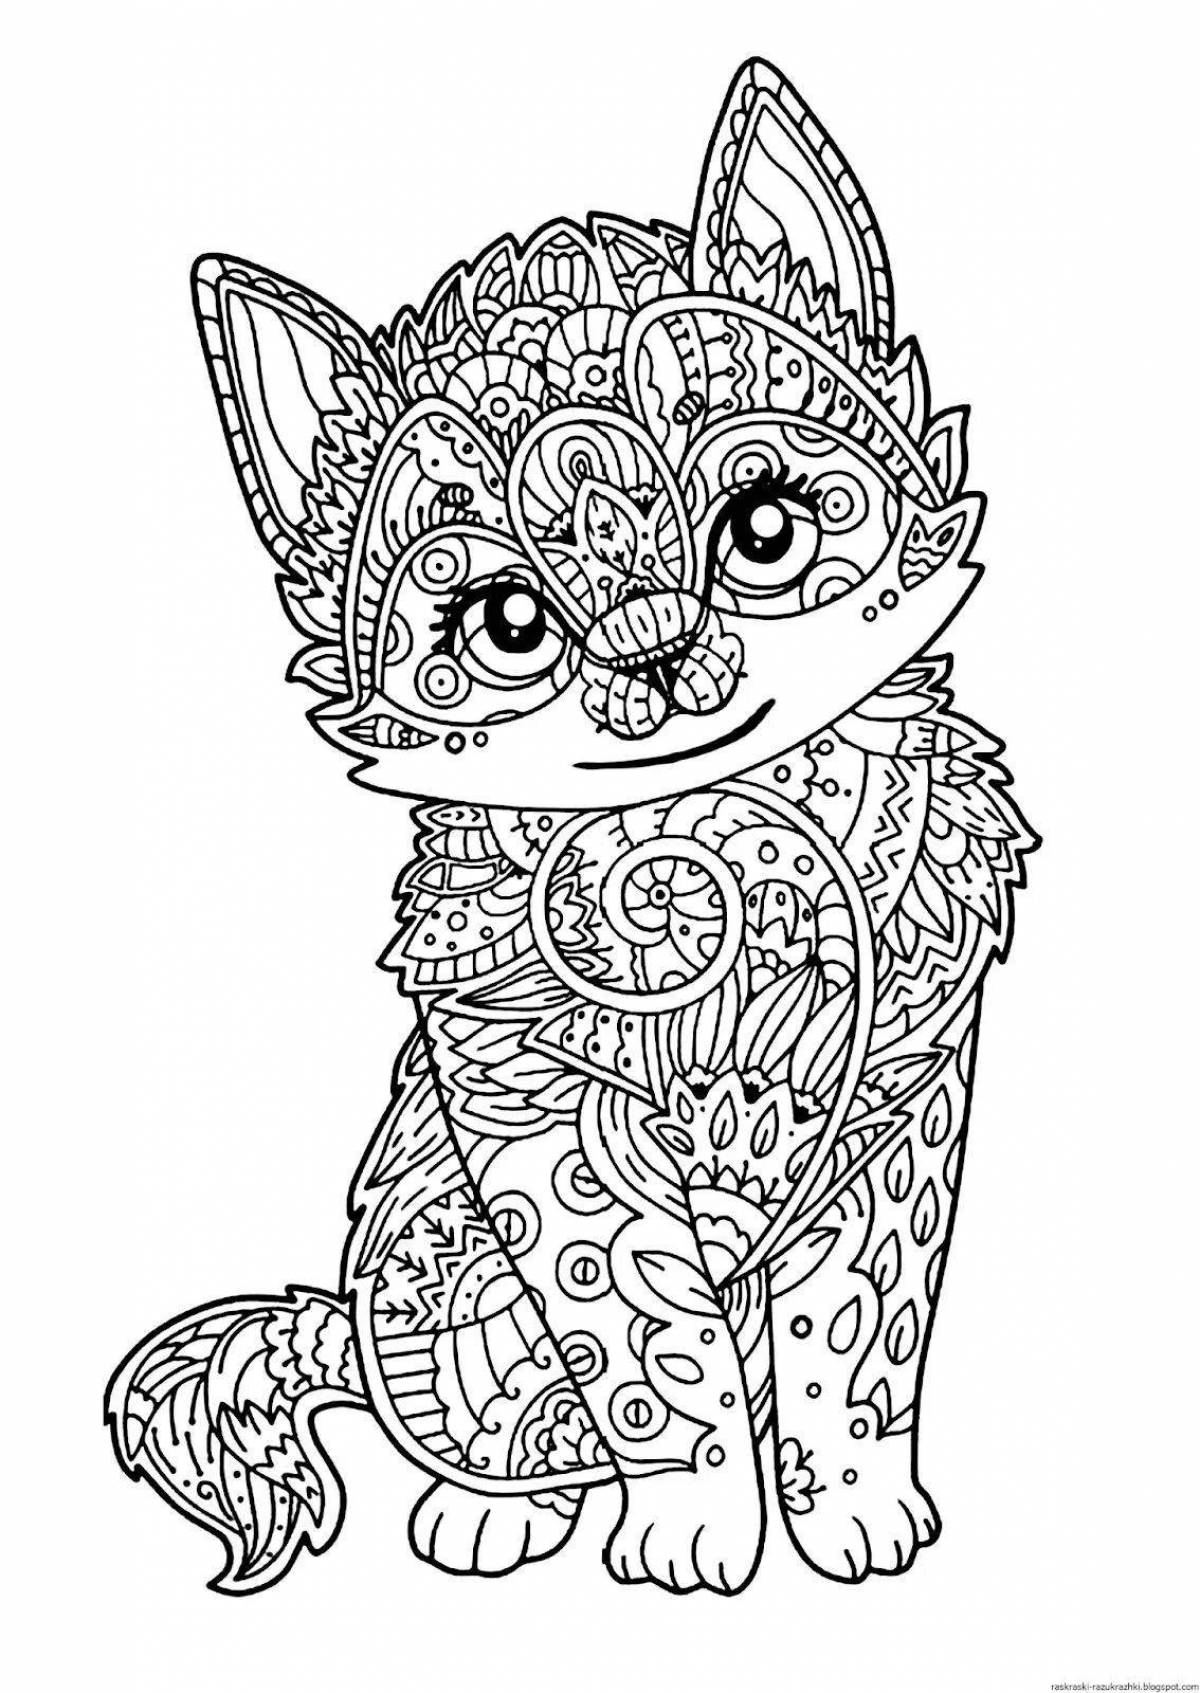 Elegant coloring for girls 12 years old complex patterns antistress animals